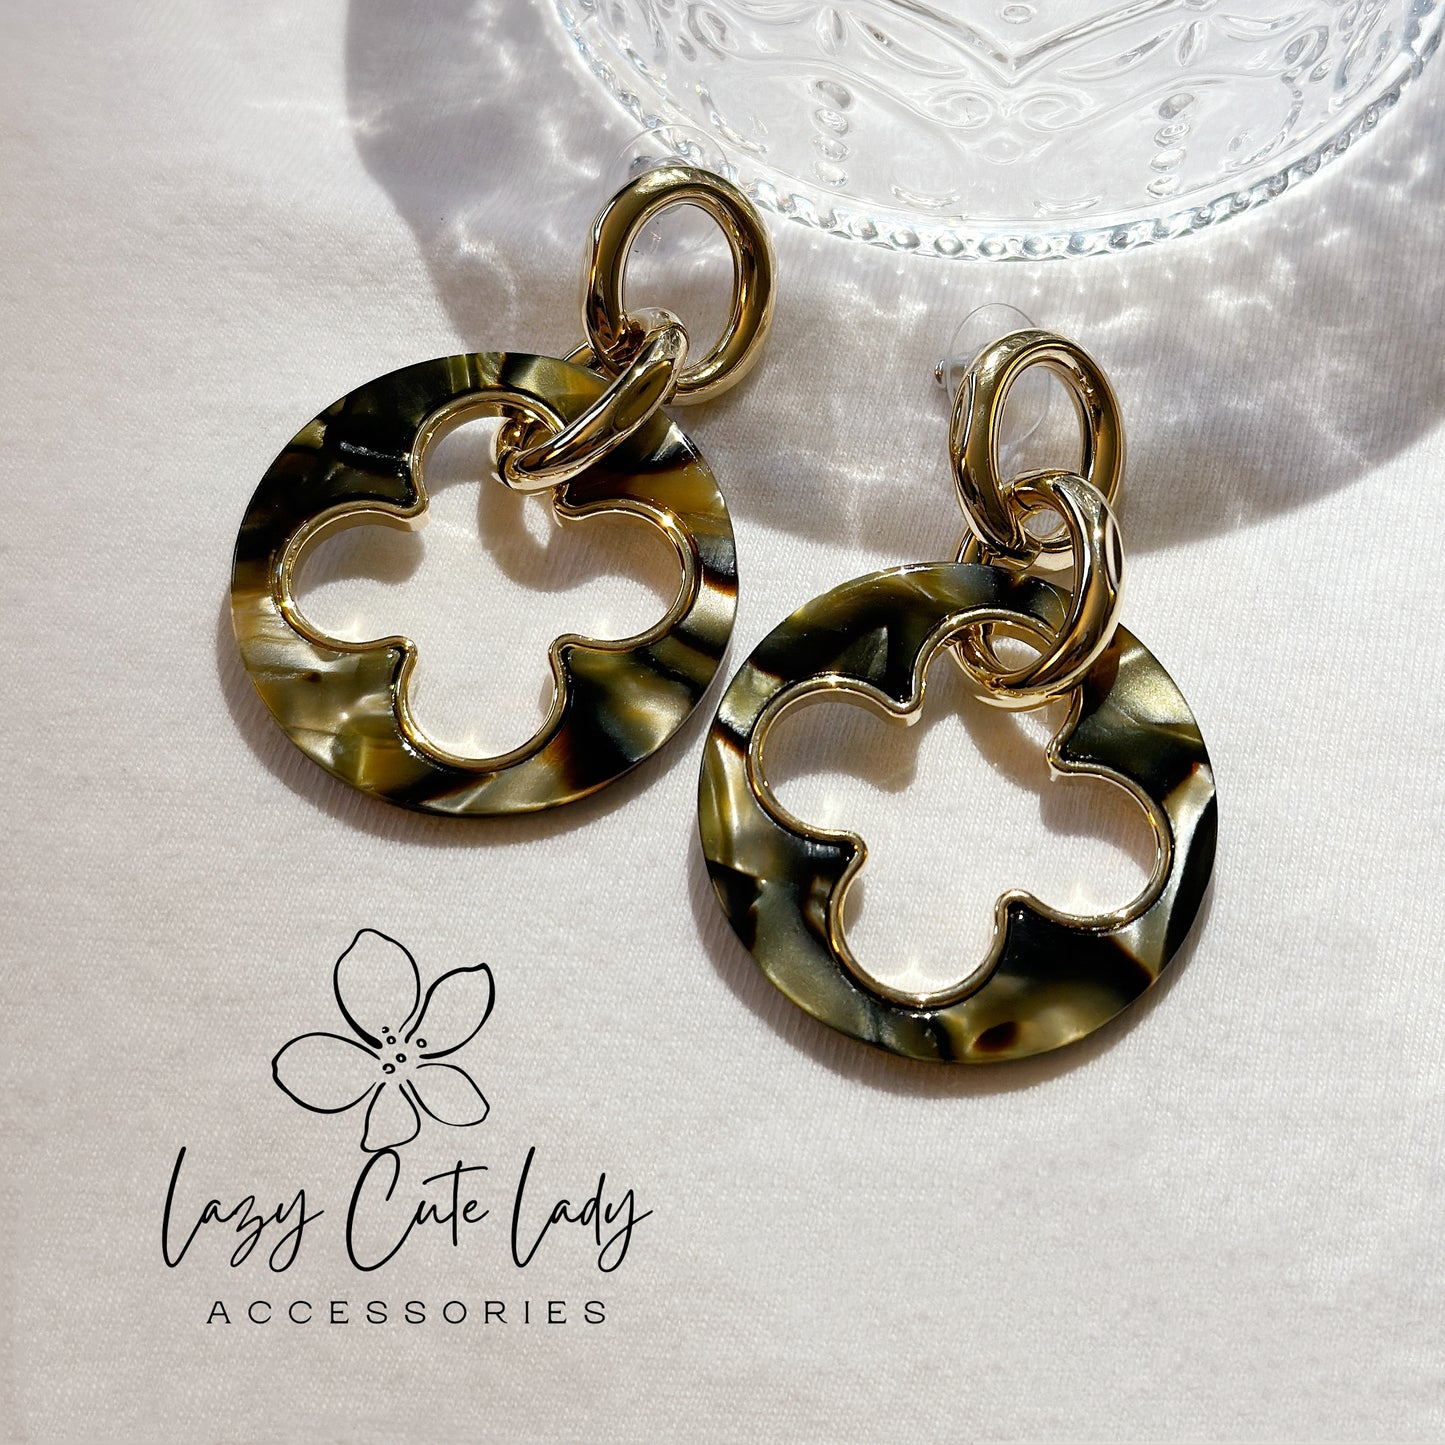 Chic Vine: Acetate and Metal Clover Cutout Earrings